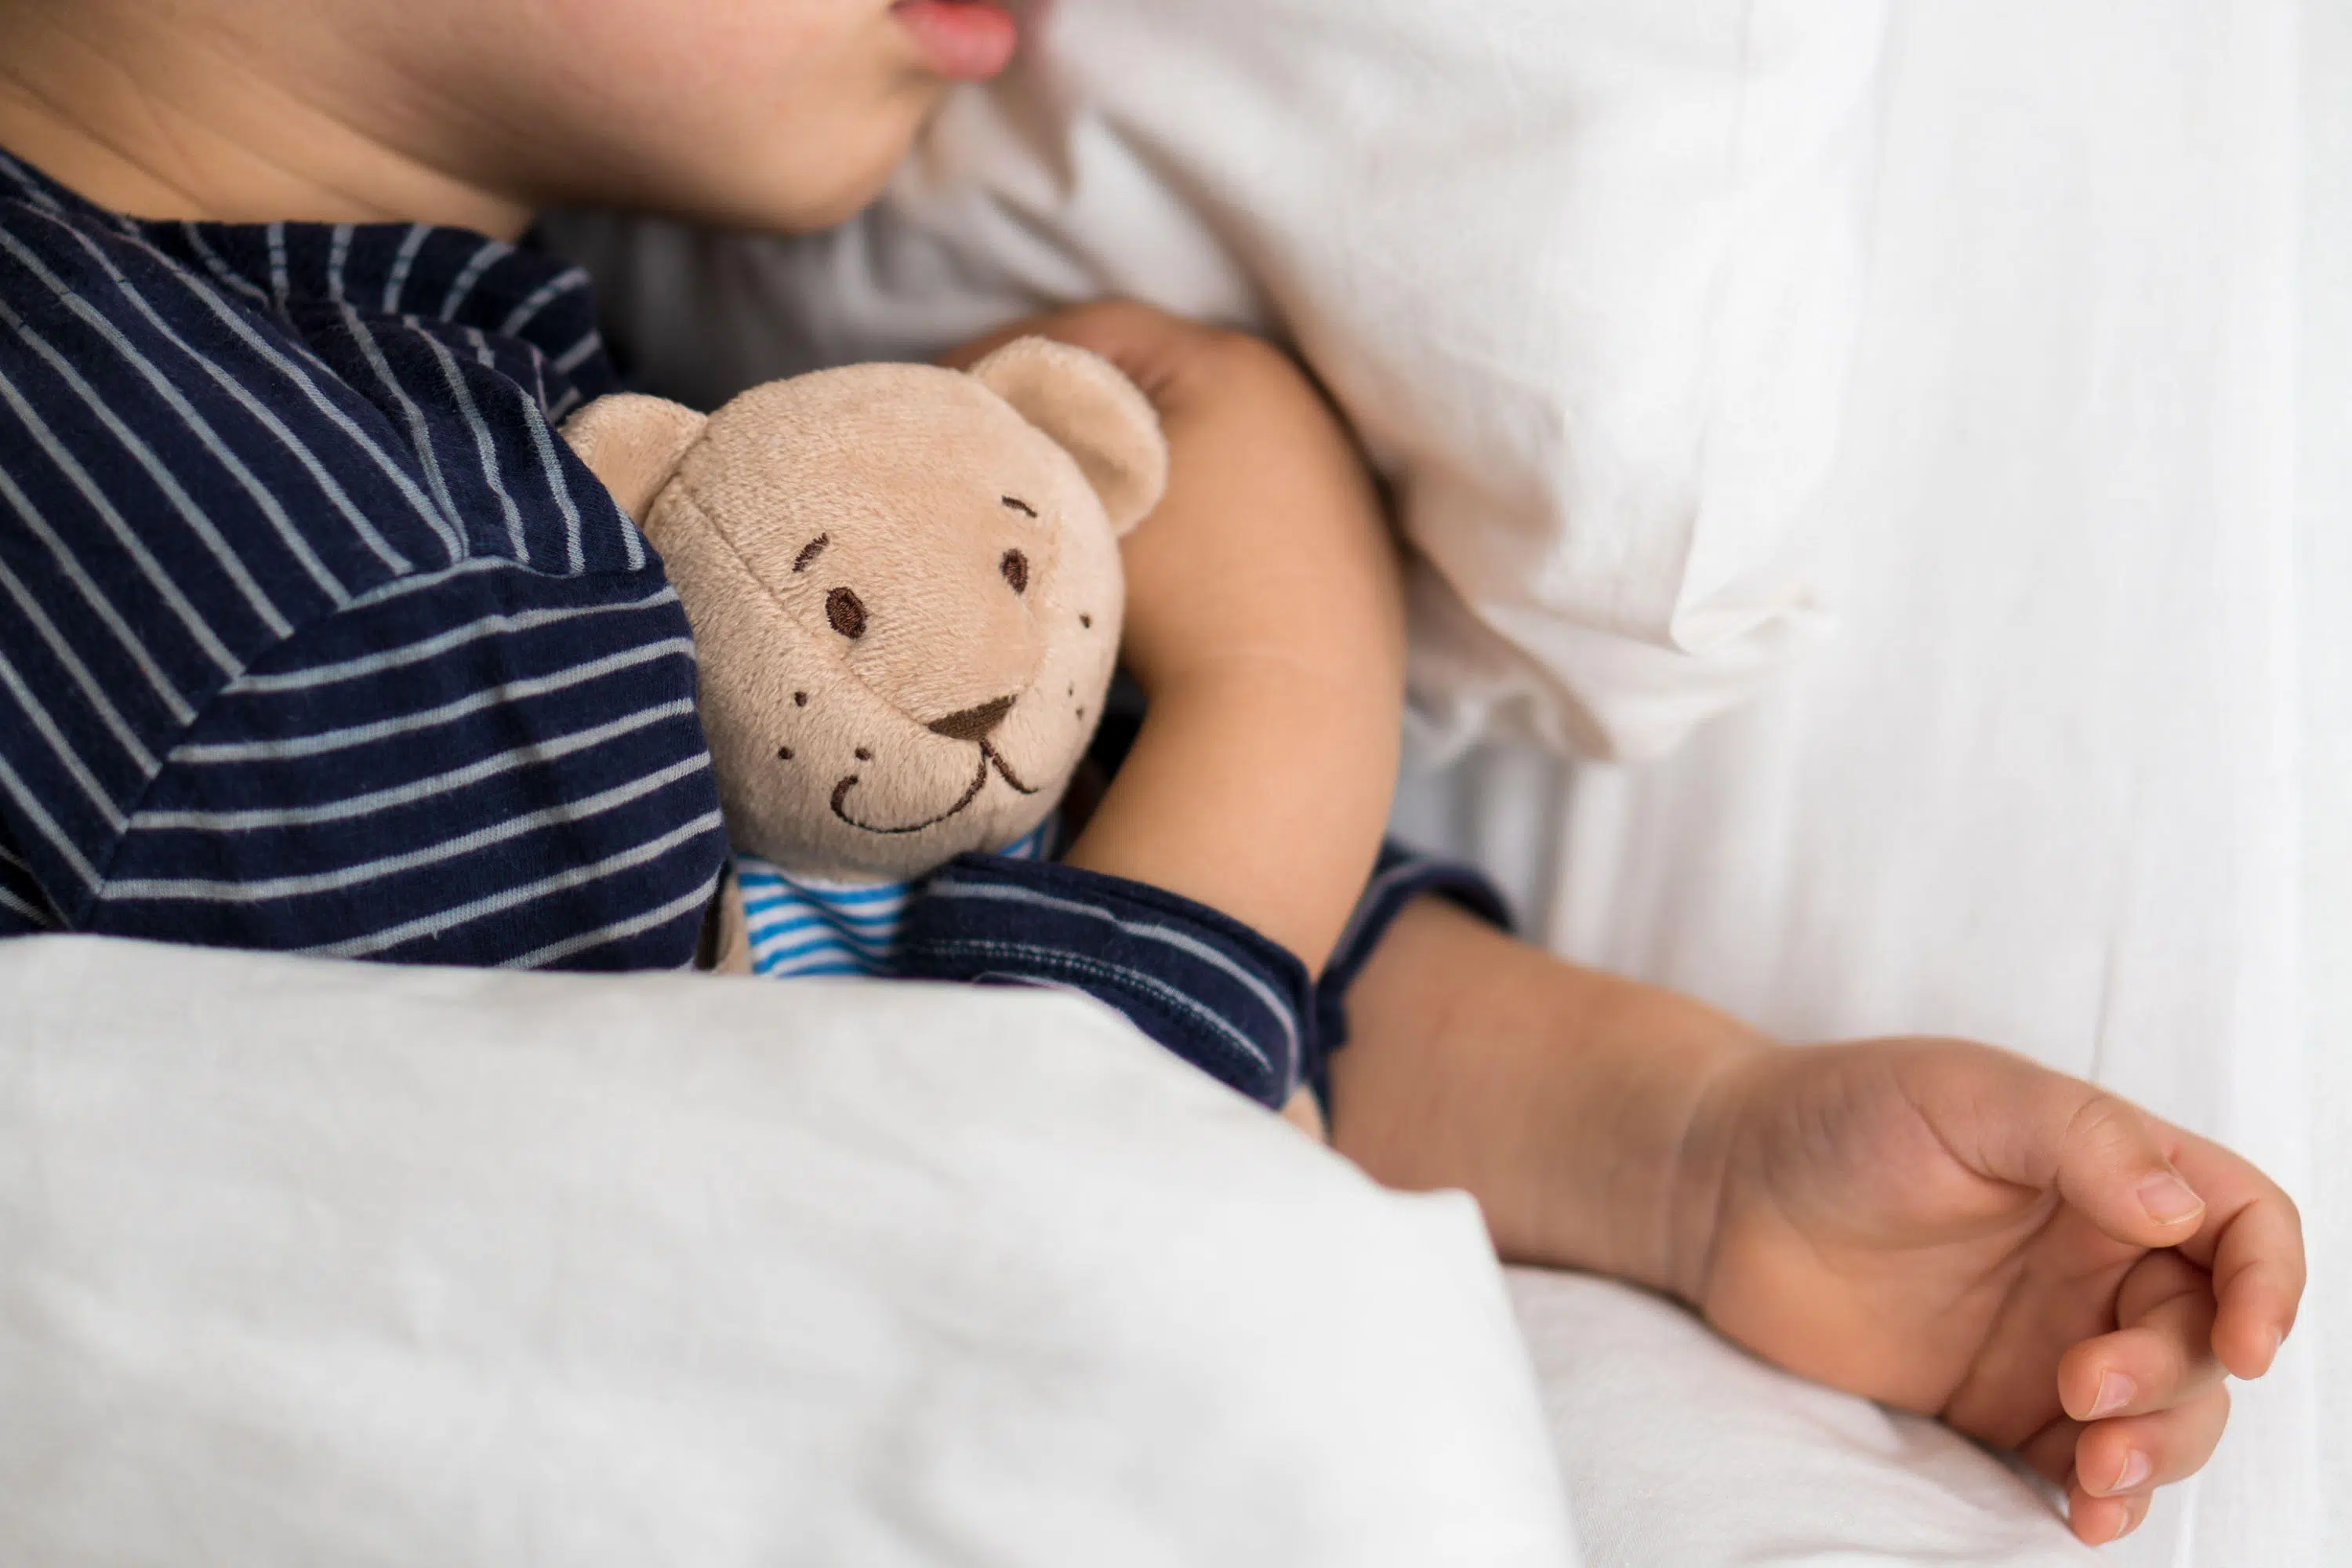 Young child cuddles teddy bear scaled